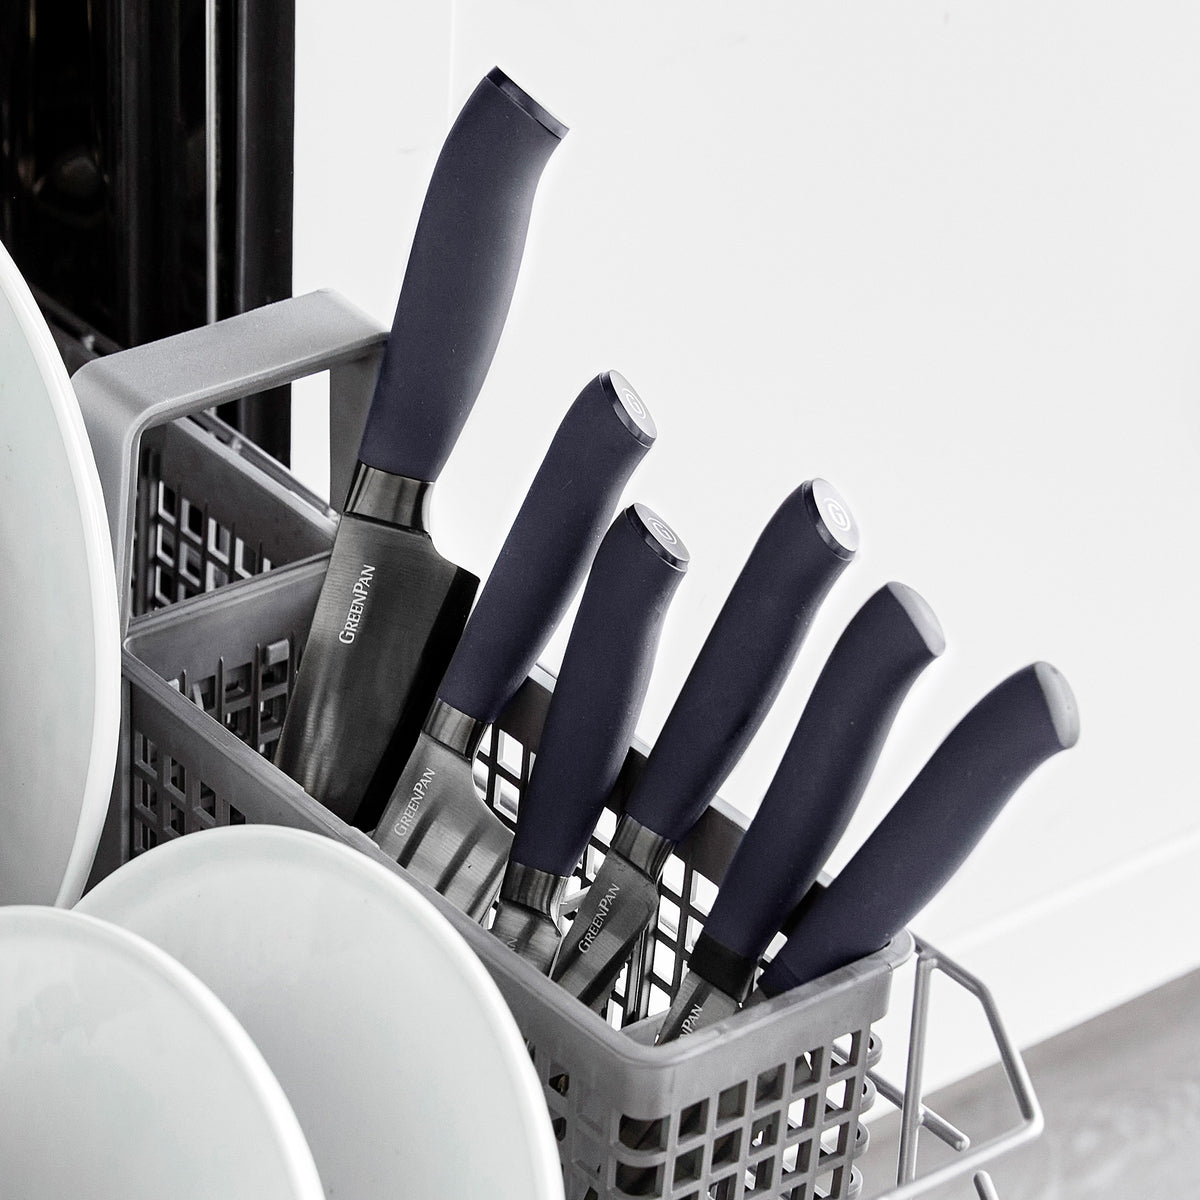 16-Piece Knife Set with Block